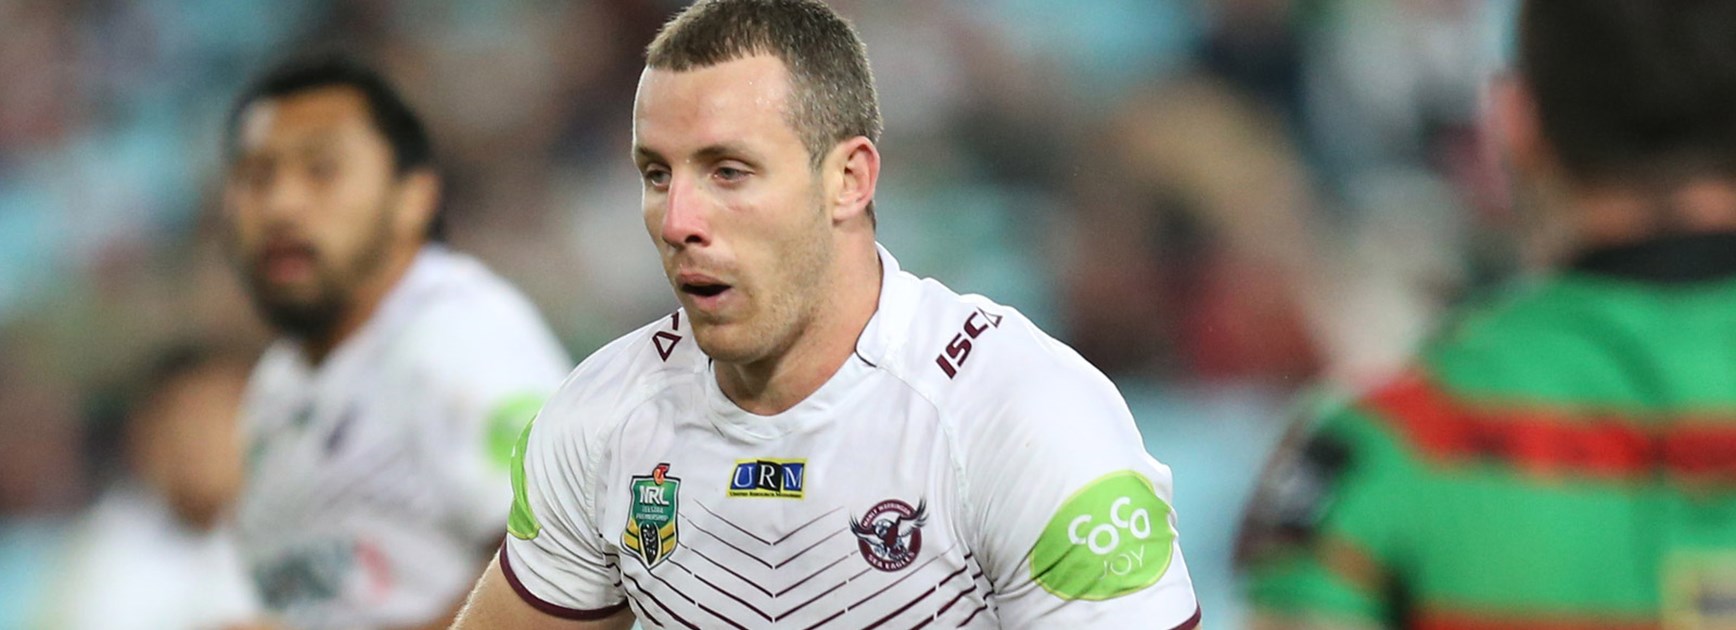 Sea Eagles prop James Hasson has signed a one-year deal with the Eels.